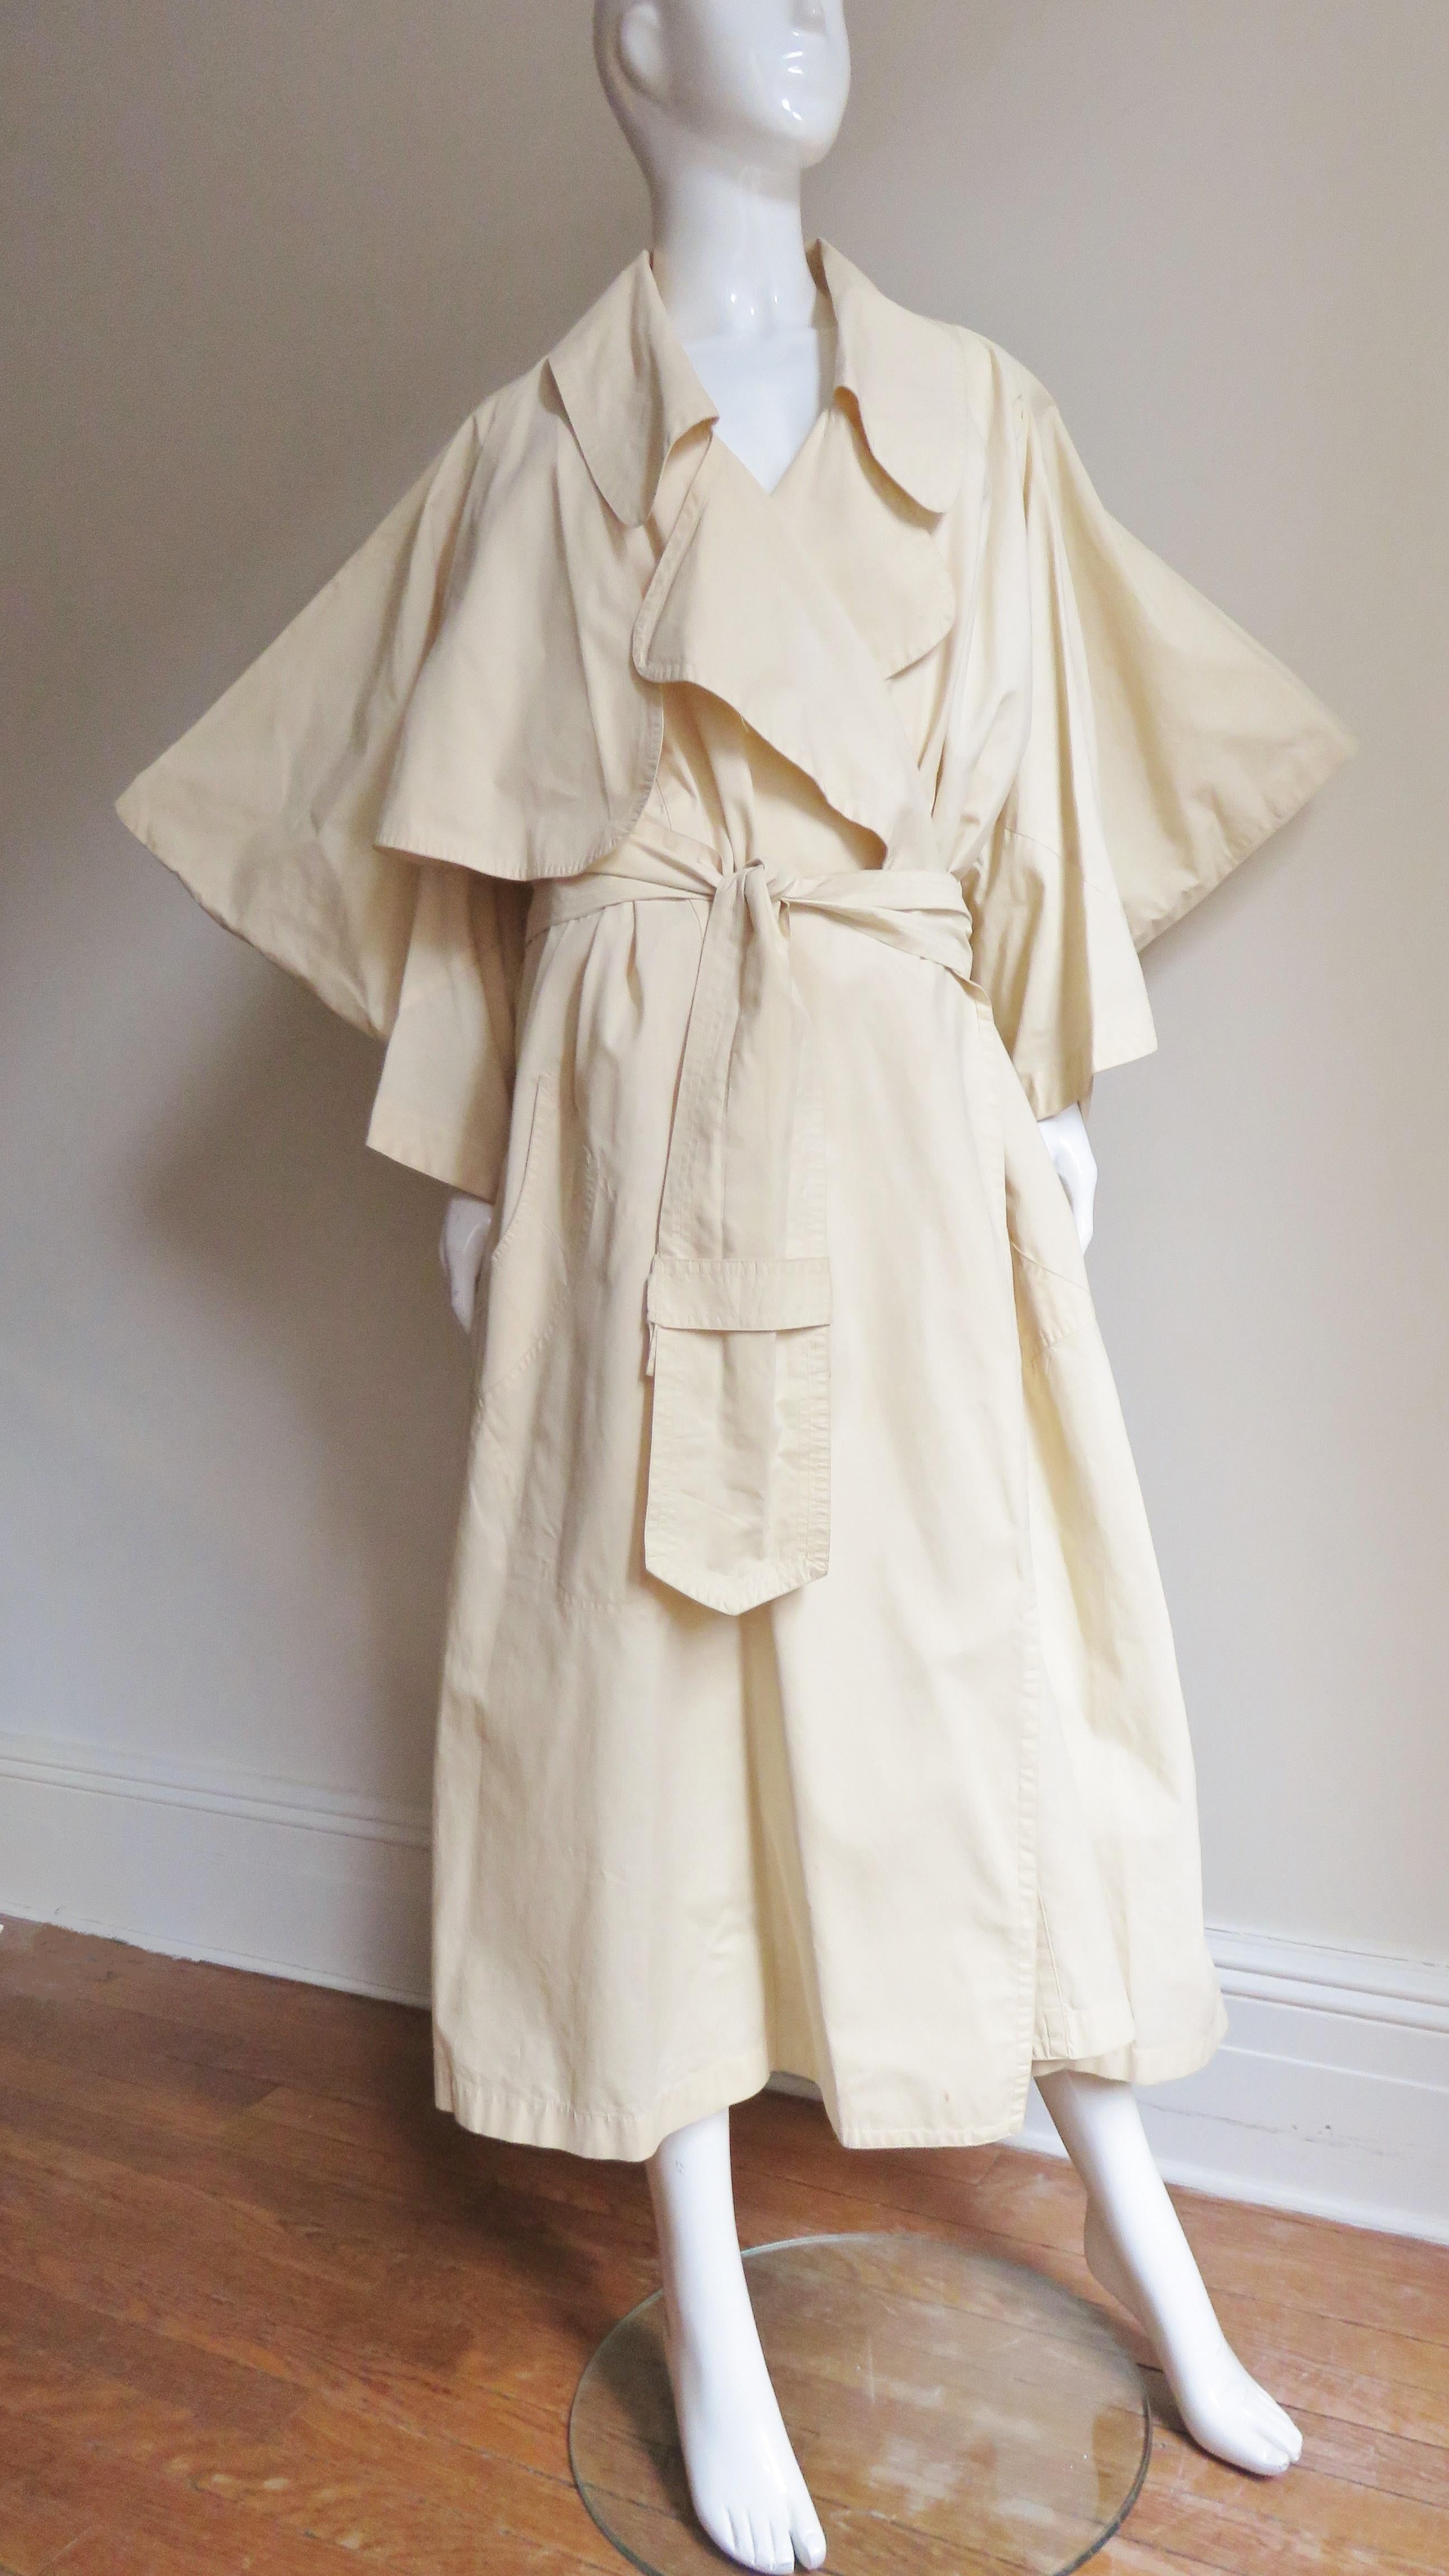 An incredible oversized pale yellow cotton trench coat from the final collaboration of Vivienne Westwood and Malcolm McLaren, the A/W 1983-1984 Worlds End Witches Collection which has been the subject of museum exhibitions. The coat features rounded